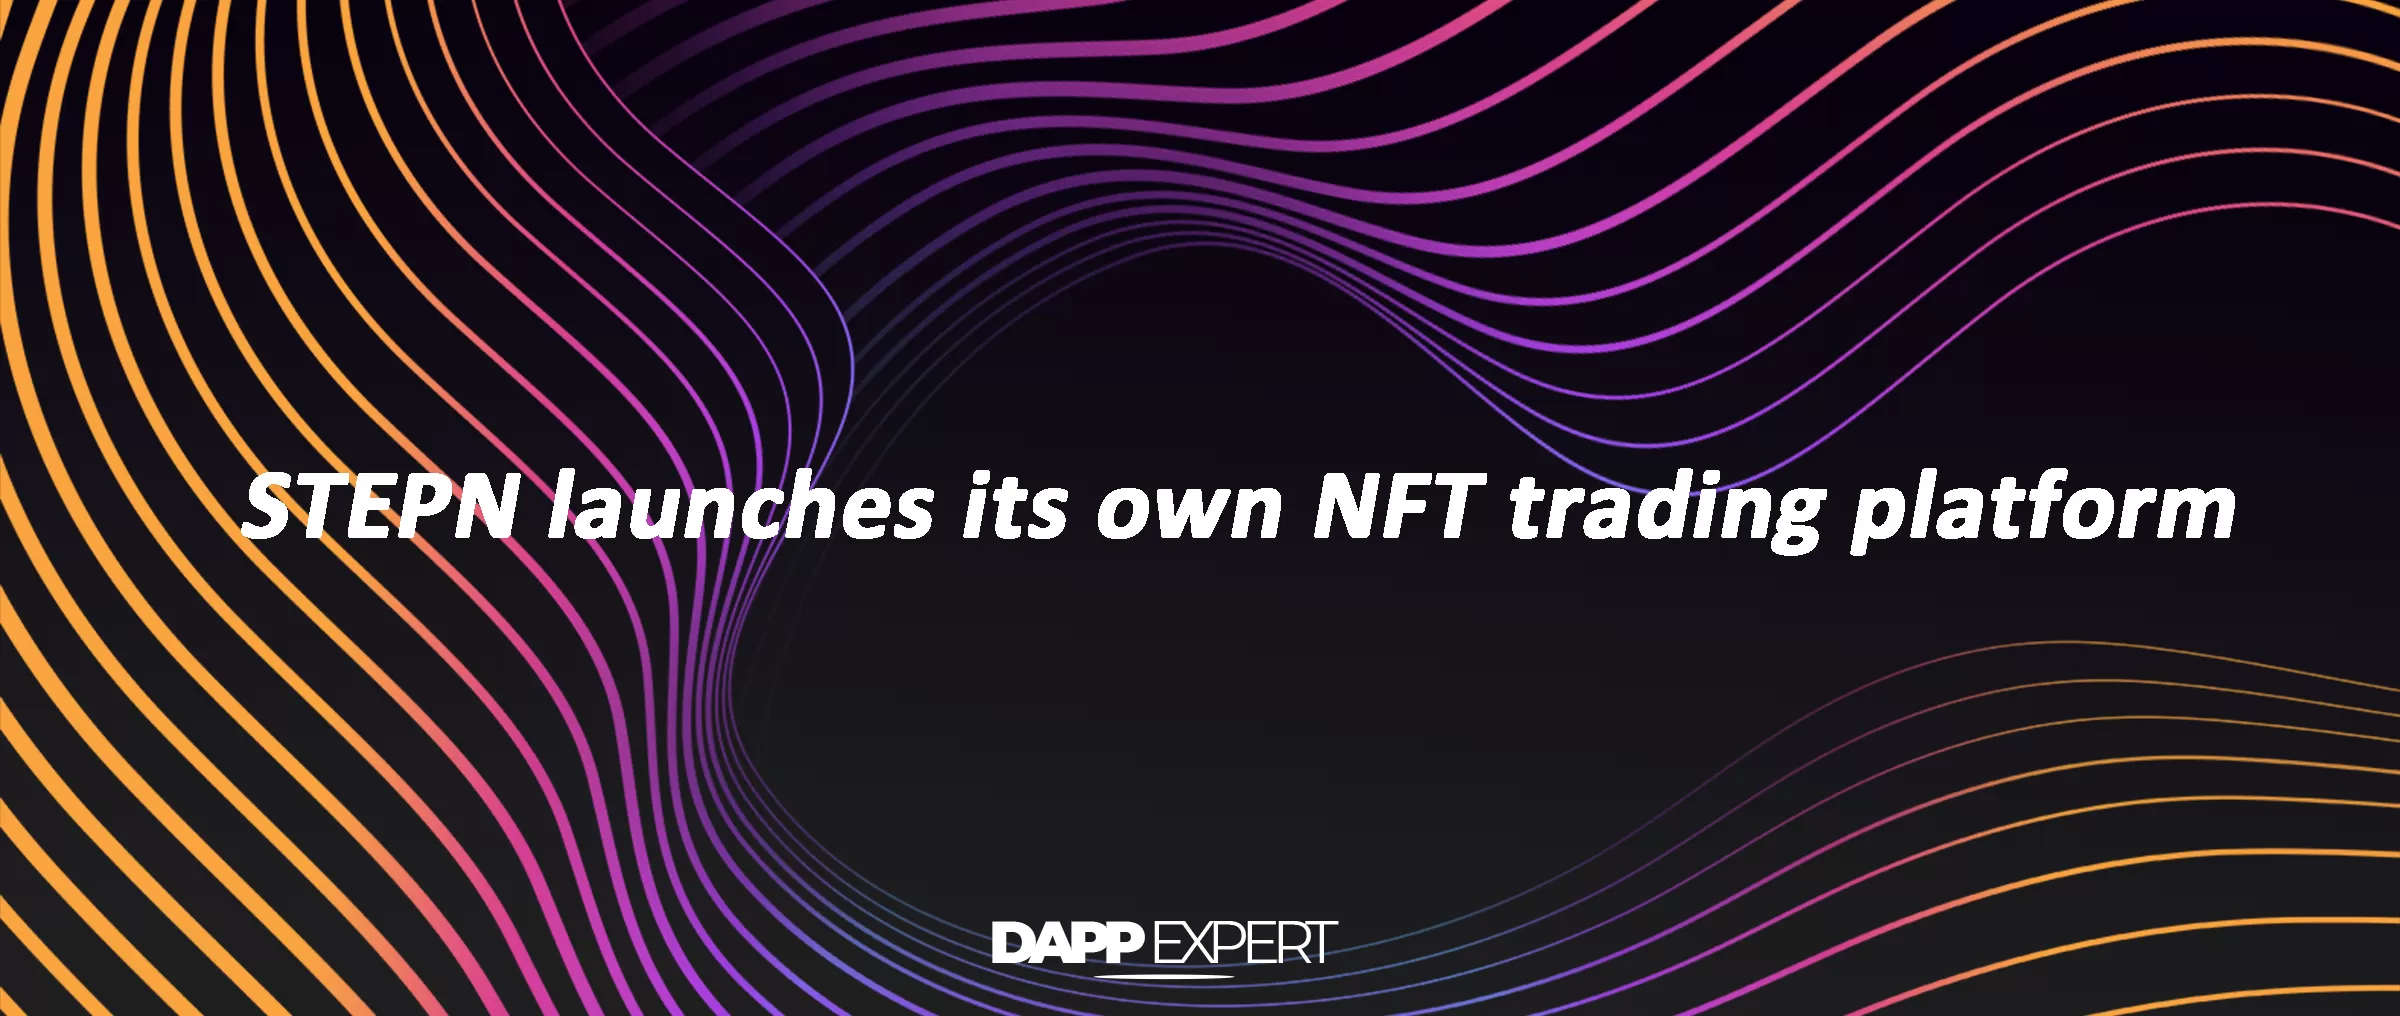 STEPN launches its own NFT trading platform